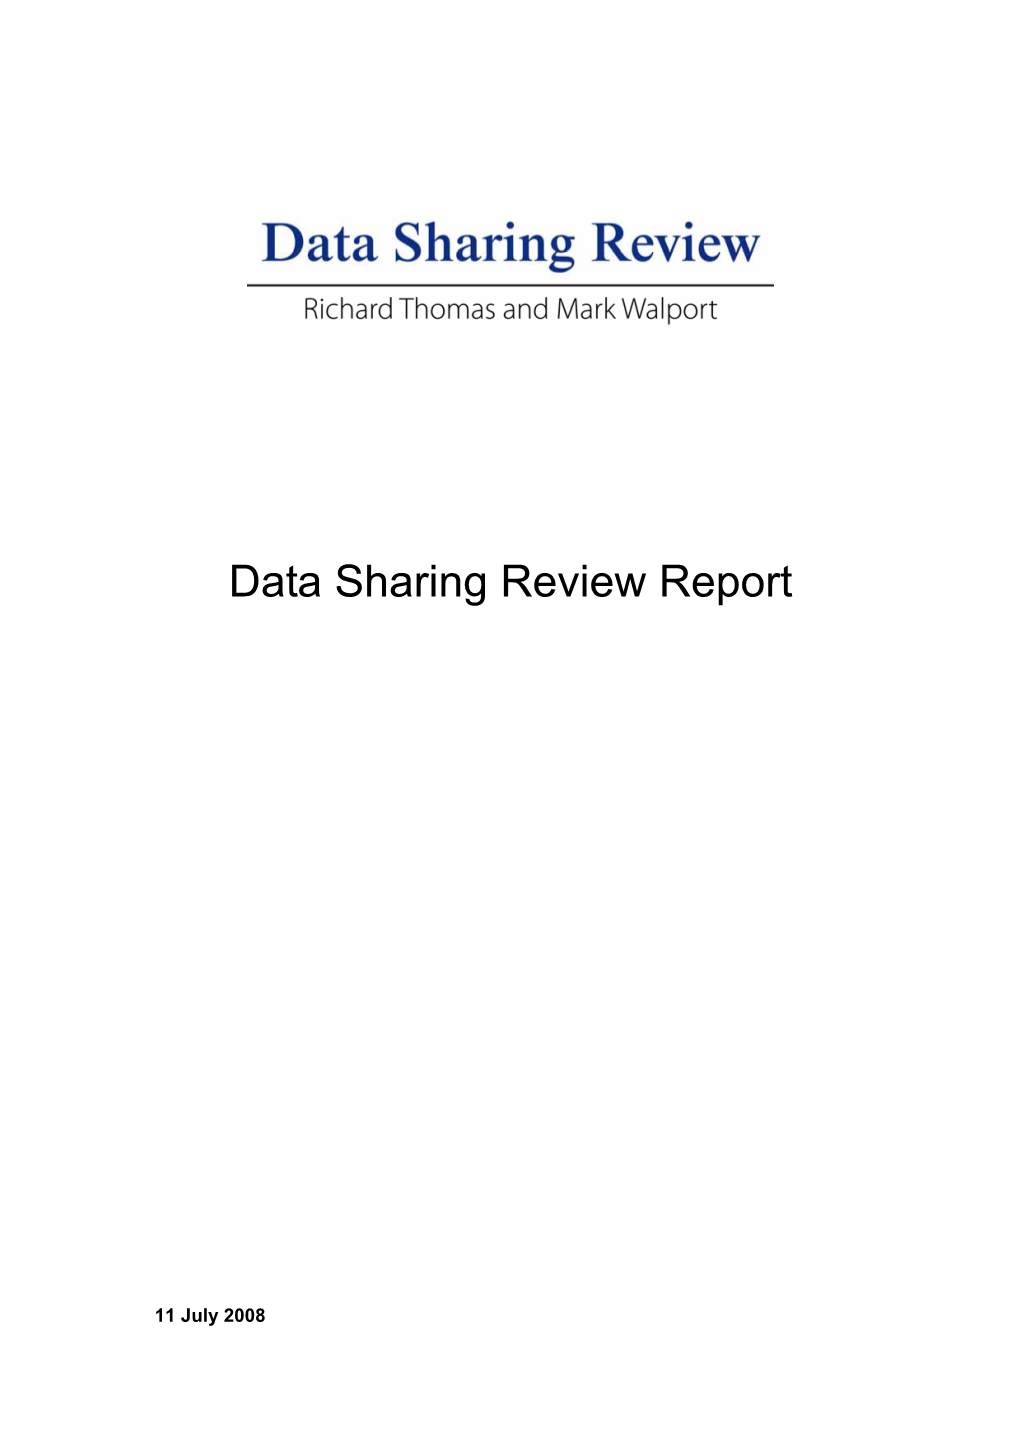 Data Sharing Review Report